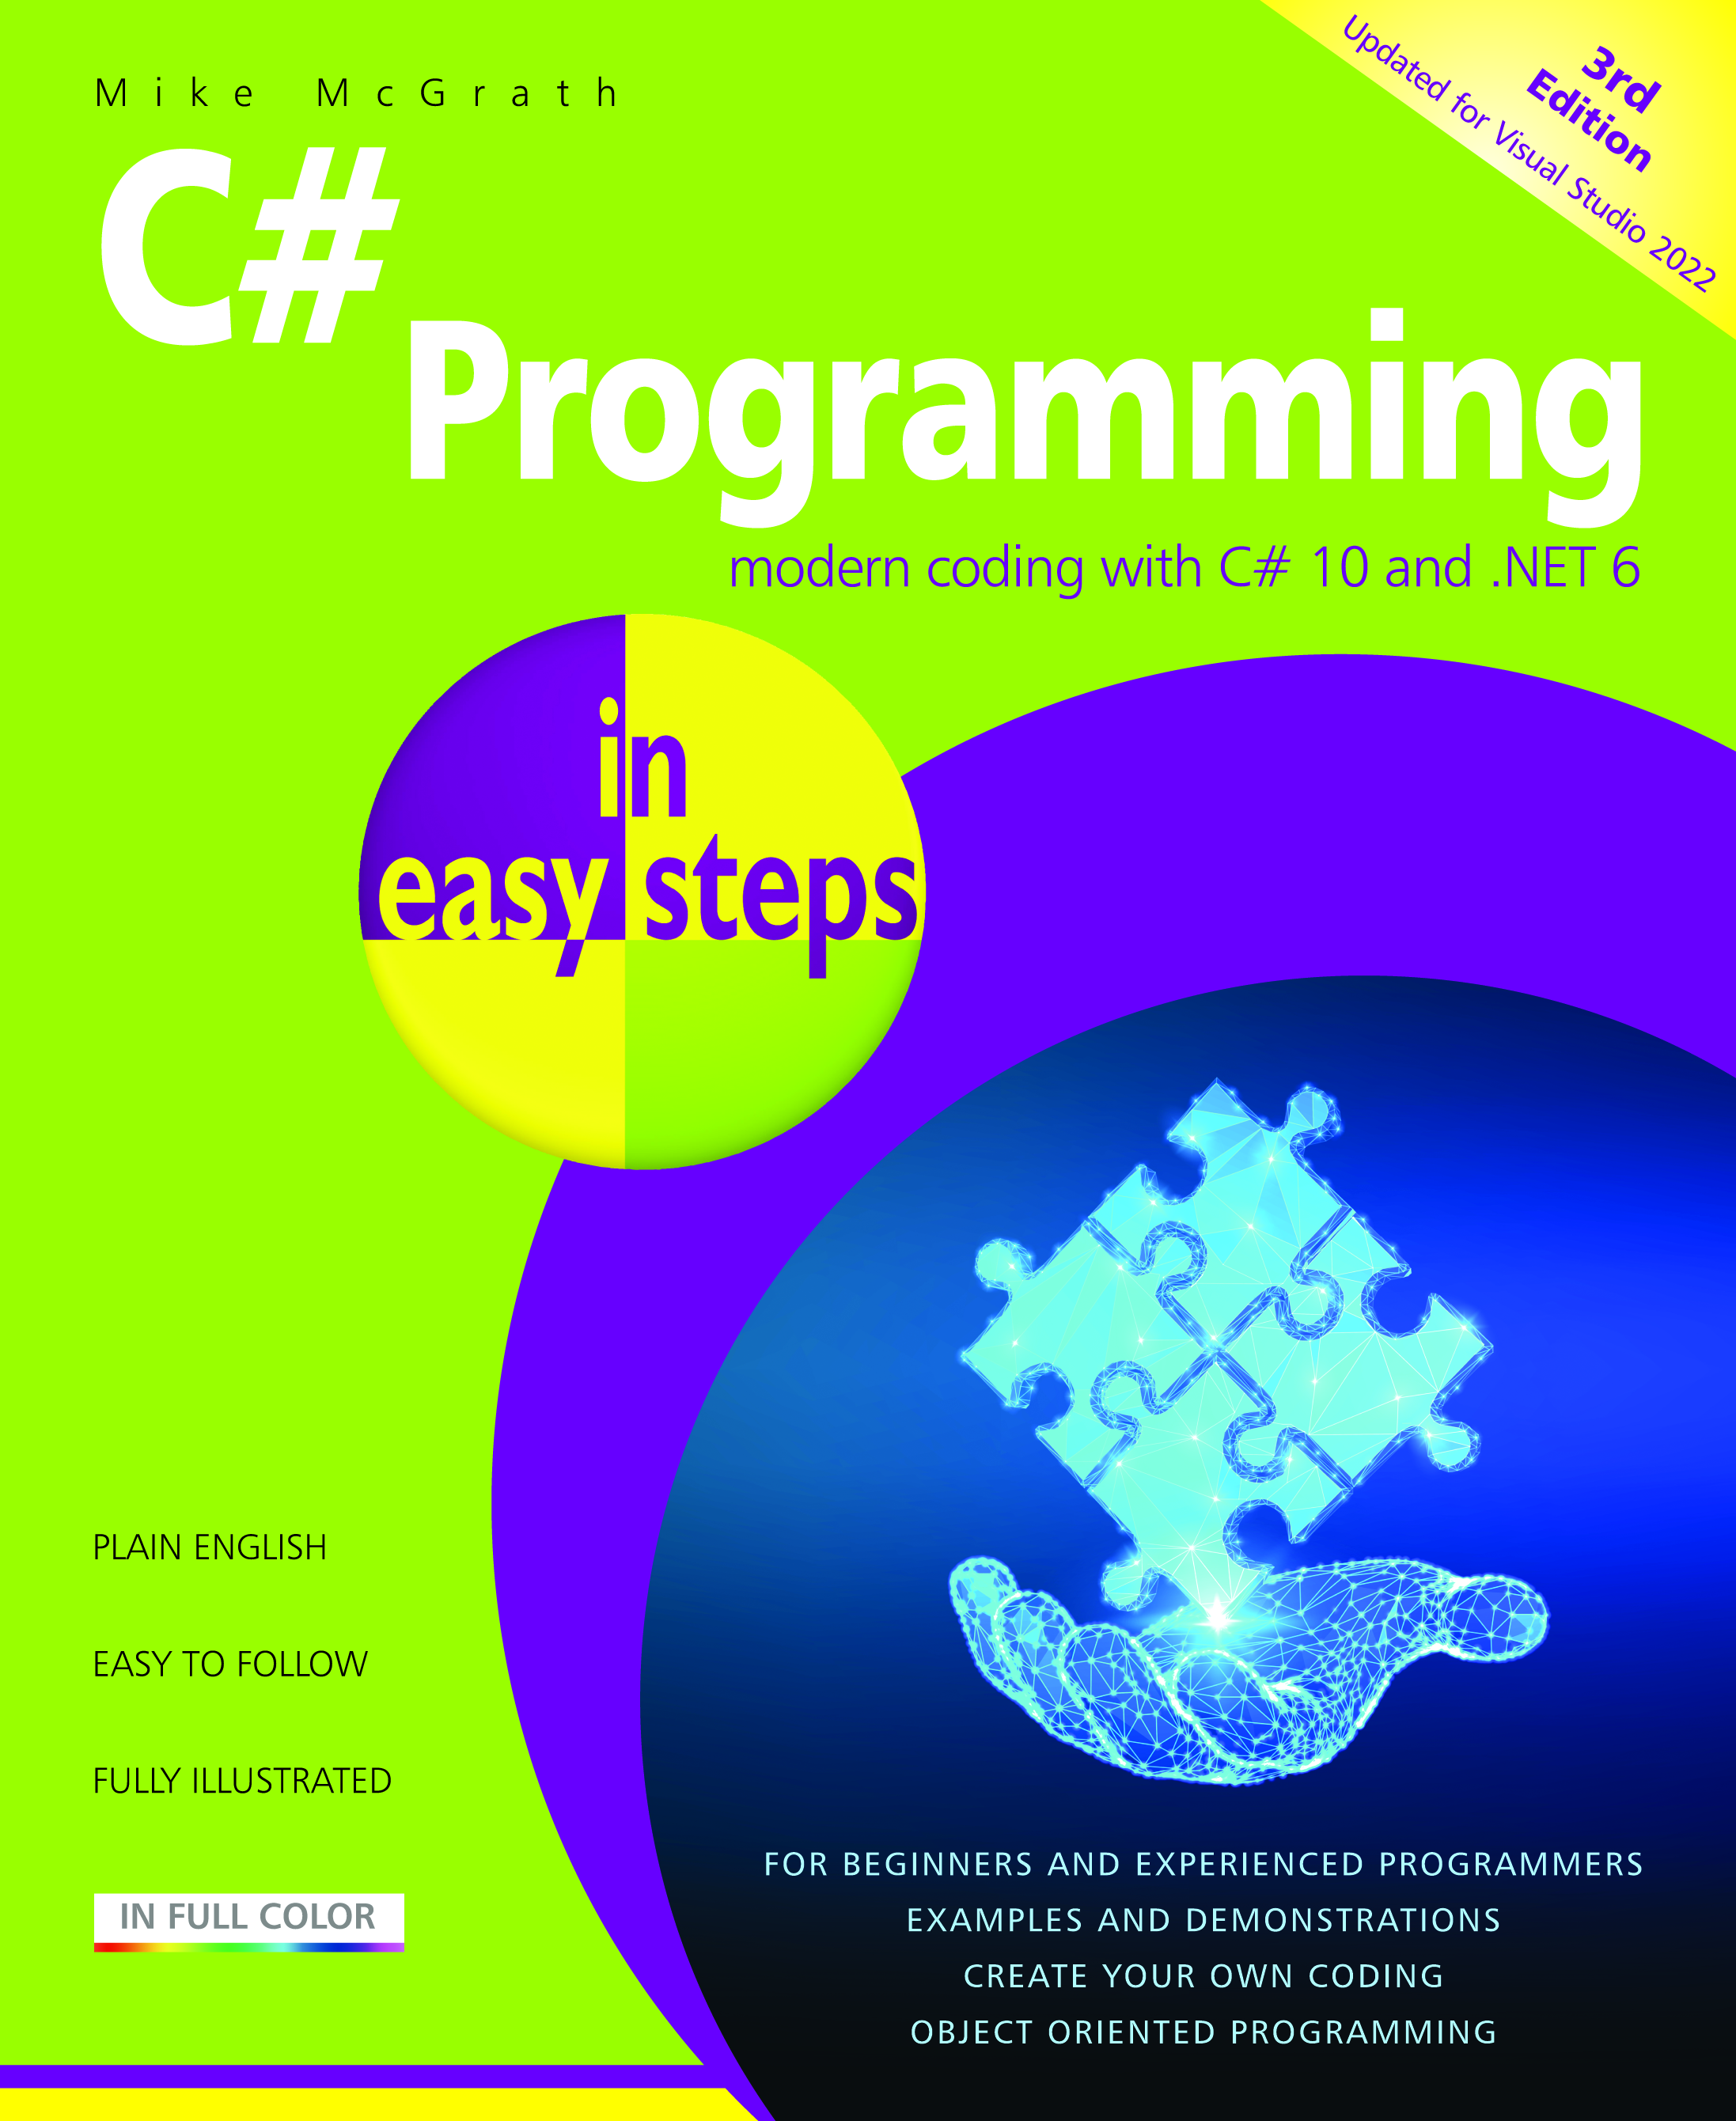 New release: C# Programming in easy steps, 3rd edition